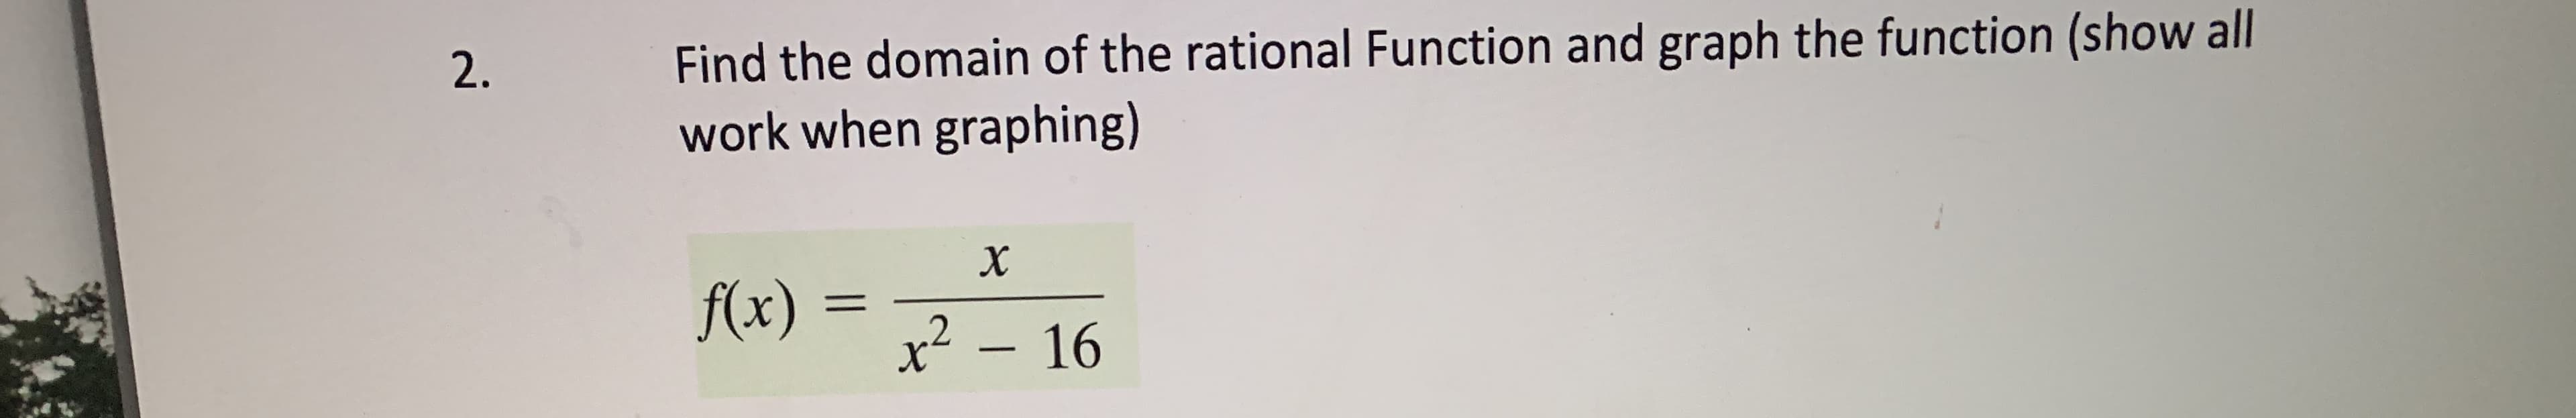 ### Problem 2

**Task:**

Find the domain of the rational function and graph the function (show all work when graphing).

**Function:**

\[ f(x) = \frac{x}{x^2 - 16} \]

---

**Solution:**

1. **Find the Domain:**
   - The domain of a rational function excludes values that make the denominator equal to zero.
   - Set the denominator equal to zero and solve for \( x \):
     \[
     x^2 - 16 = 0
     \]
     \[
     x^2 = 16
     \]
     \[
     x = \pm 4
     \]
   - Thus, the values \( x = 4 \) and \( x = -4 \) make the denominator zero.

   - Therefore, the domain of \( f(x) \) is:
     \[
     \text{Domain: } \{ x \in \mathbb{R} \mid x \neq -4, x \neq 4 \}
     \]

2. **Graph the Function:**
   - To graph the function, plot several points for different values of \( x \).
   - Identify vertical asymptotes at \( x = 4 \) and \( x = -4 \), where the function is undefined.
   - Determine the behavior of the function as \( x \) approaches these asymptotes from both the left and right.
   - Determine any horizontal asymptotes by analyzing the degrees of the polynomial in the numerator and the denominator.

   - As \( x \) approaches large positive or negative values, because the degree of the numerator is 1 (which is less than the degree of the denominator, which is 2), the horizontal asymptote is \( y = 0 \).
   - Plot additional points to create the curve of the function. Ensure to show all steps in the graphing process, including calculating values at various points and illustrating the asymptotic behavior.

**Note:** When graphing, start by plotting key points (such as intercepts), then move on to identify behavior near asymptotes, followed by plotting several additional points to accurately depict the curve.